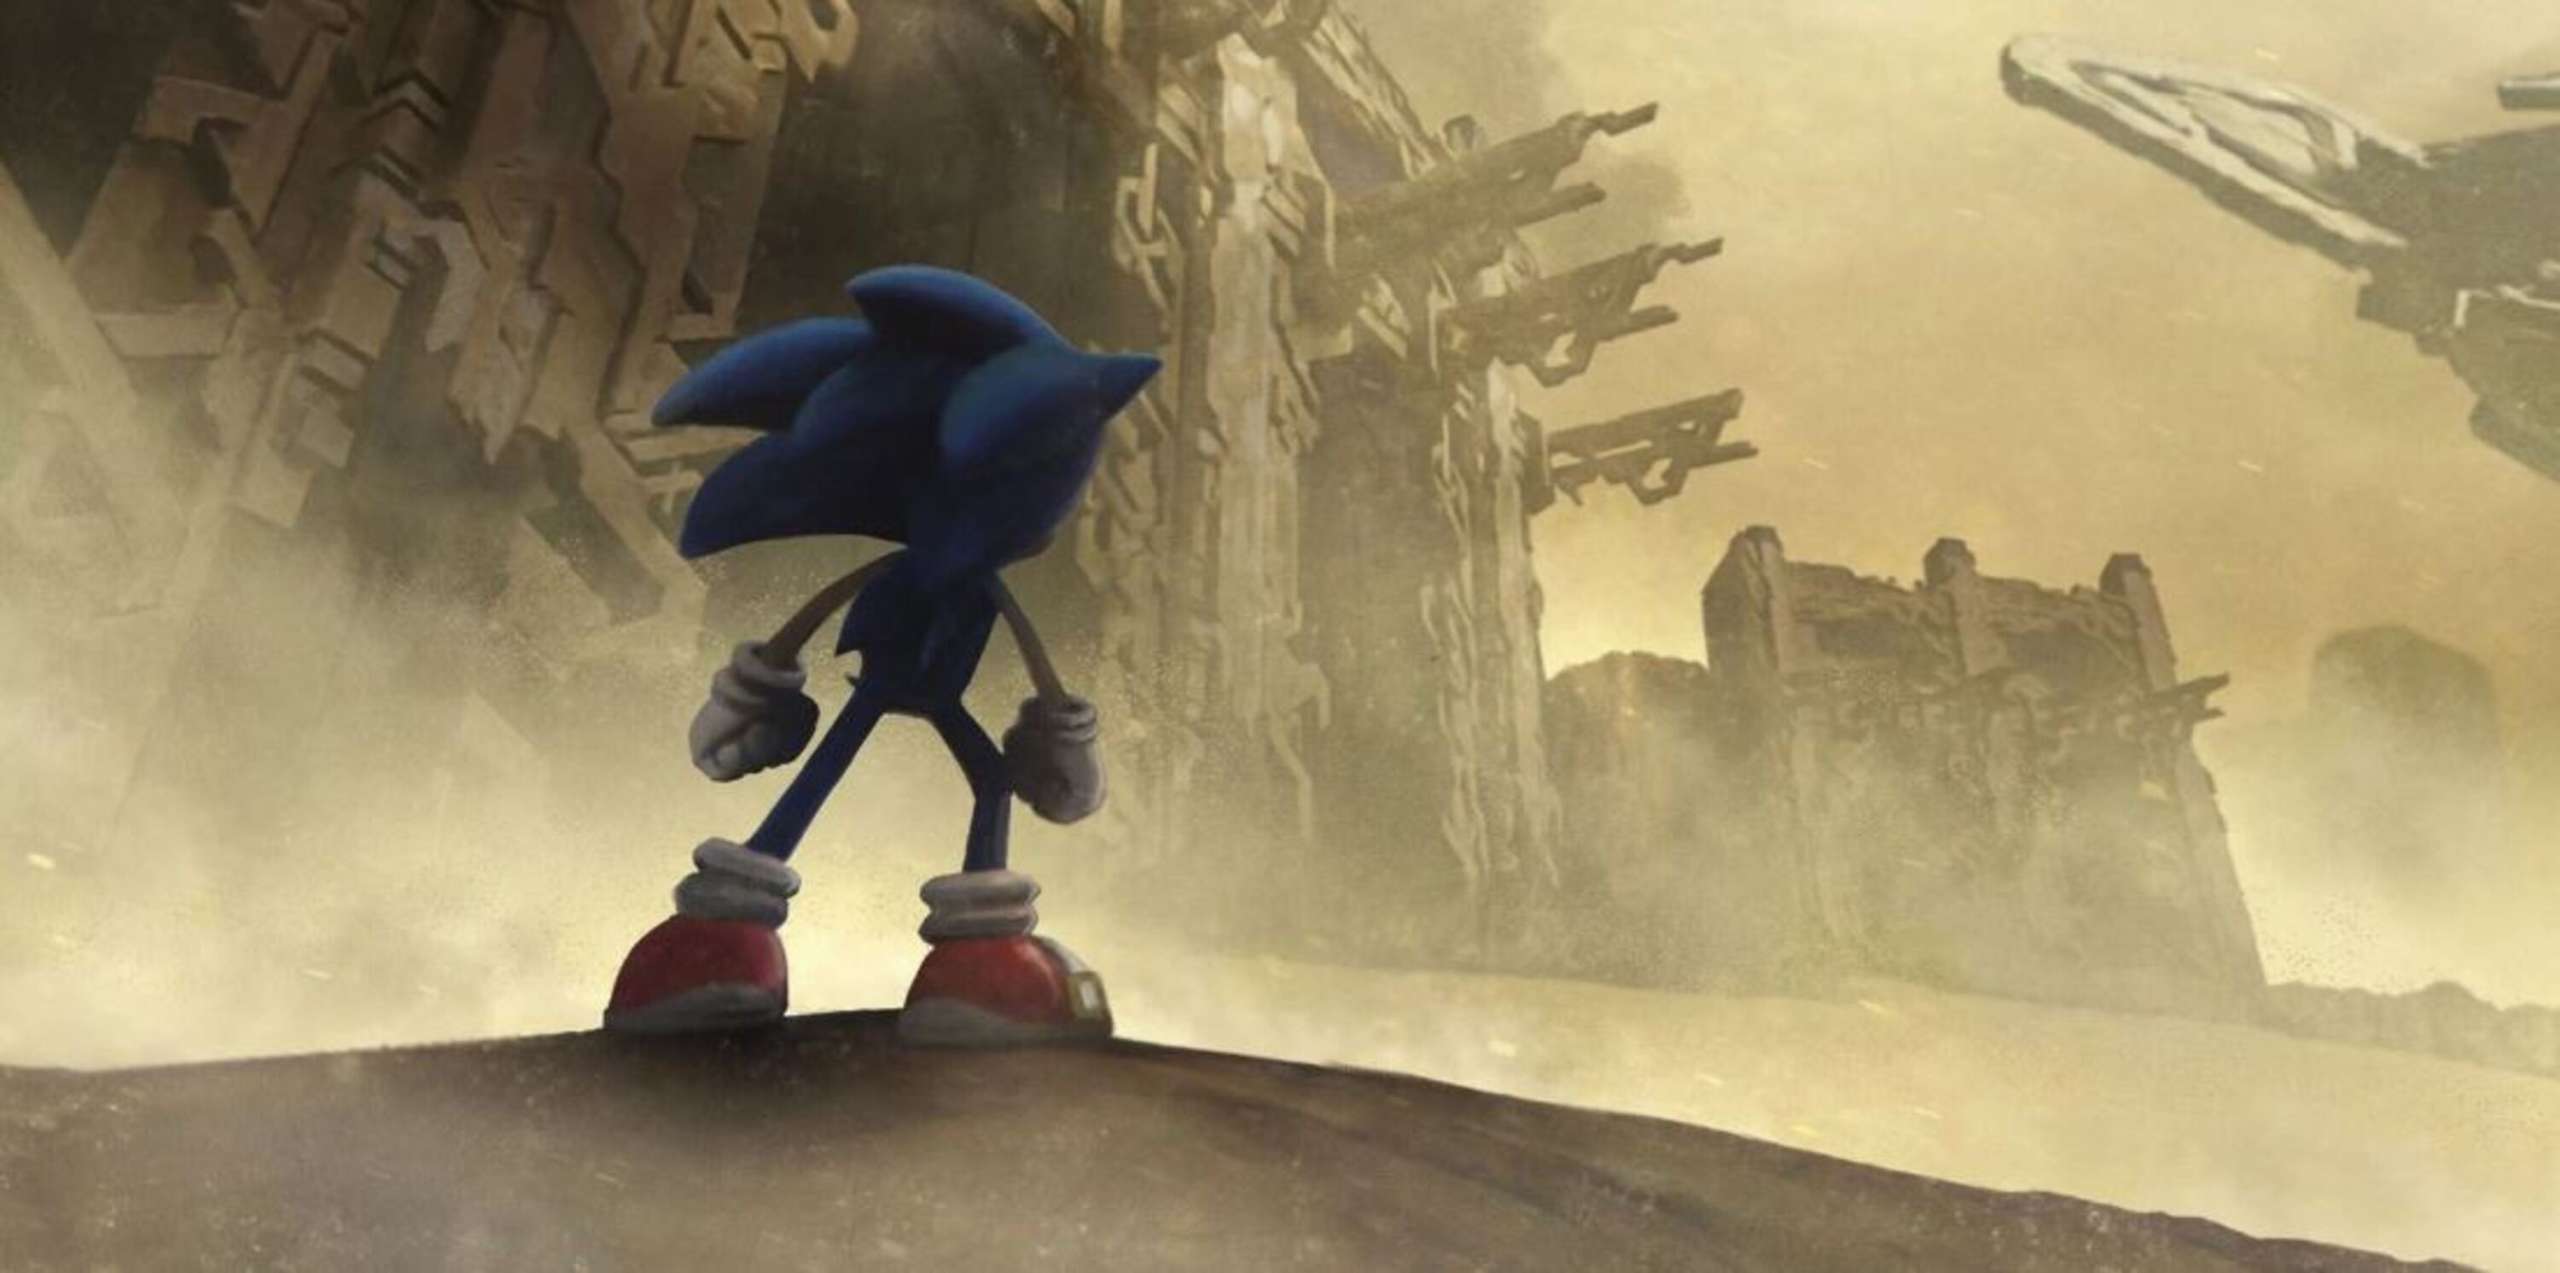 The Game May Be Released In November, According To A Listing From A Website That Advertises Particular Sonic Frontiers Products